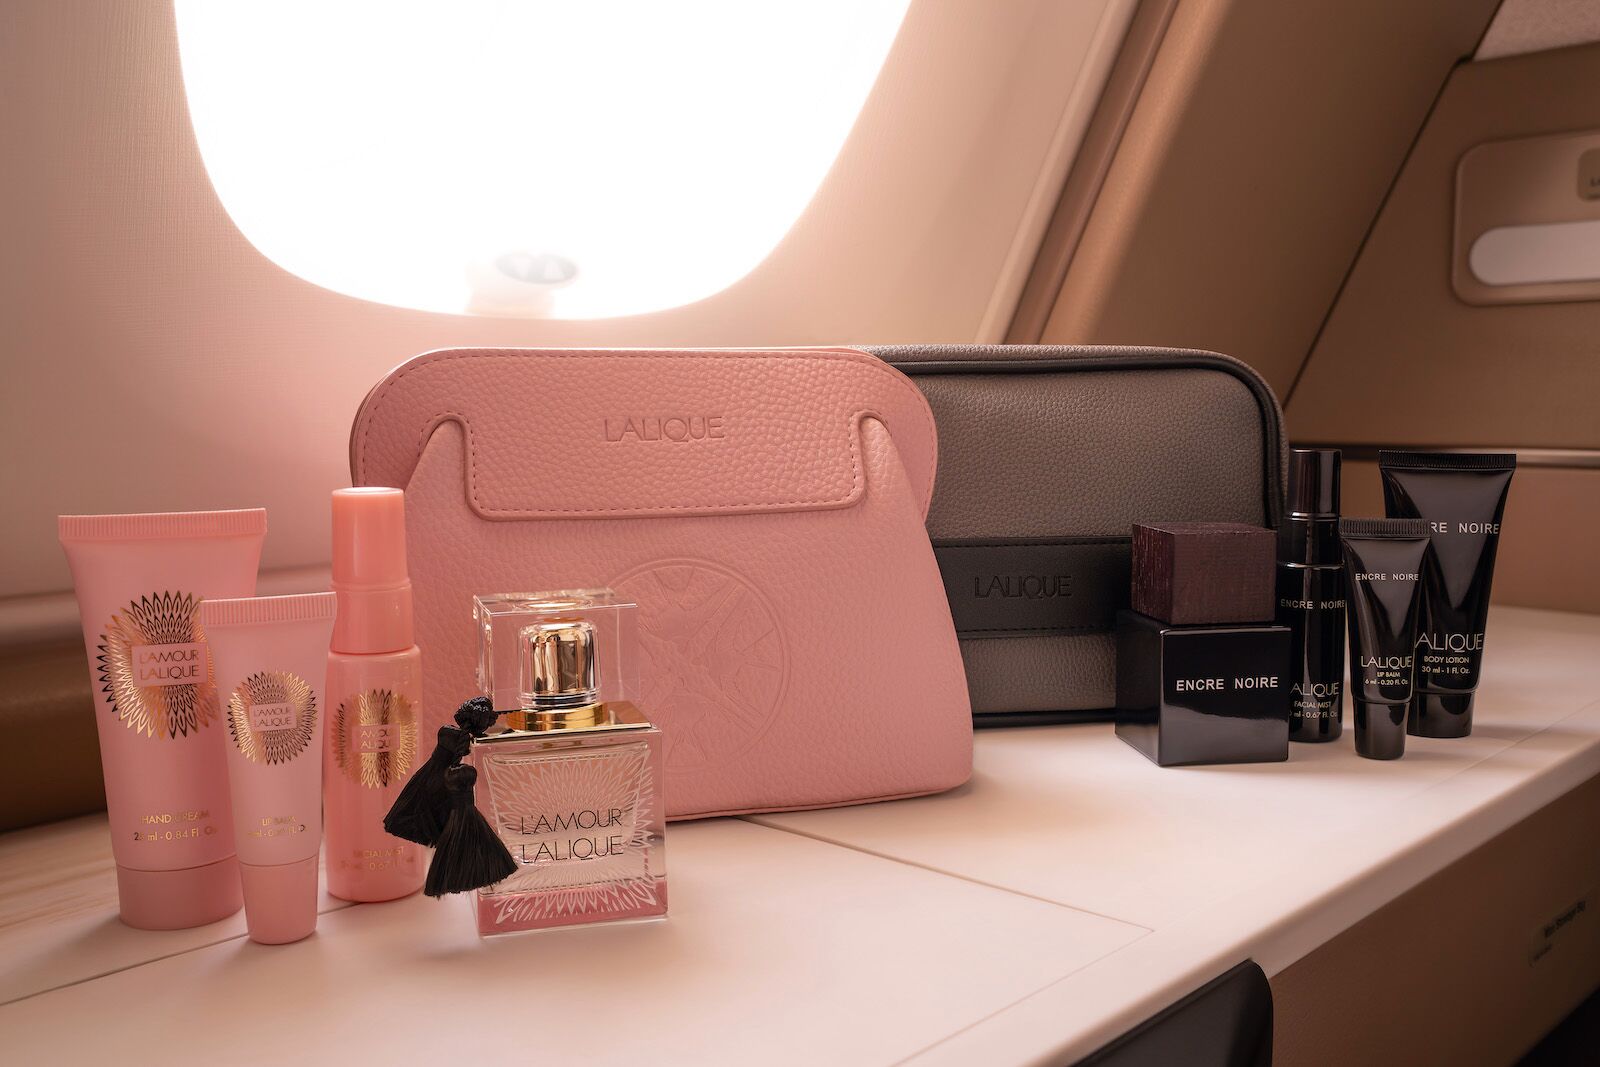 One of the most luxe airline amenity kits in the world is the one from Singapore Airlines which contains products from Lalique  for men and women